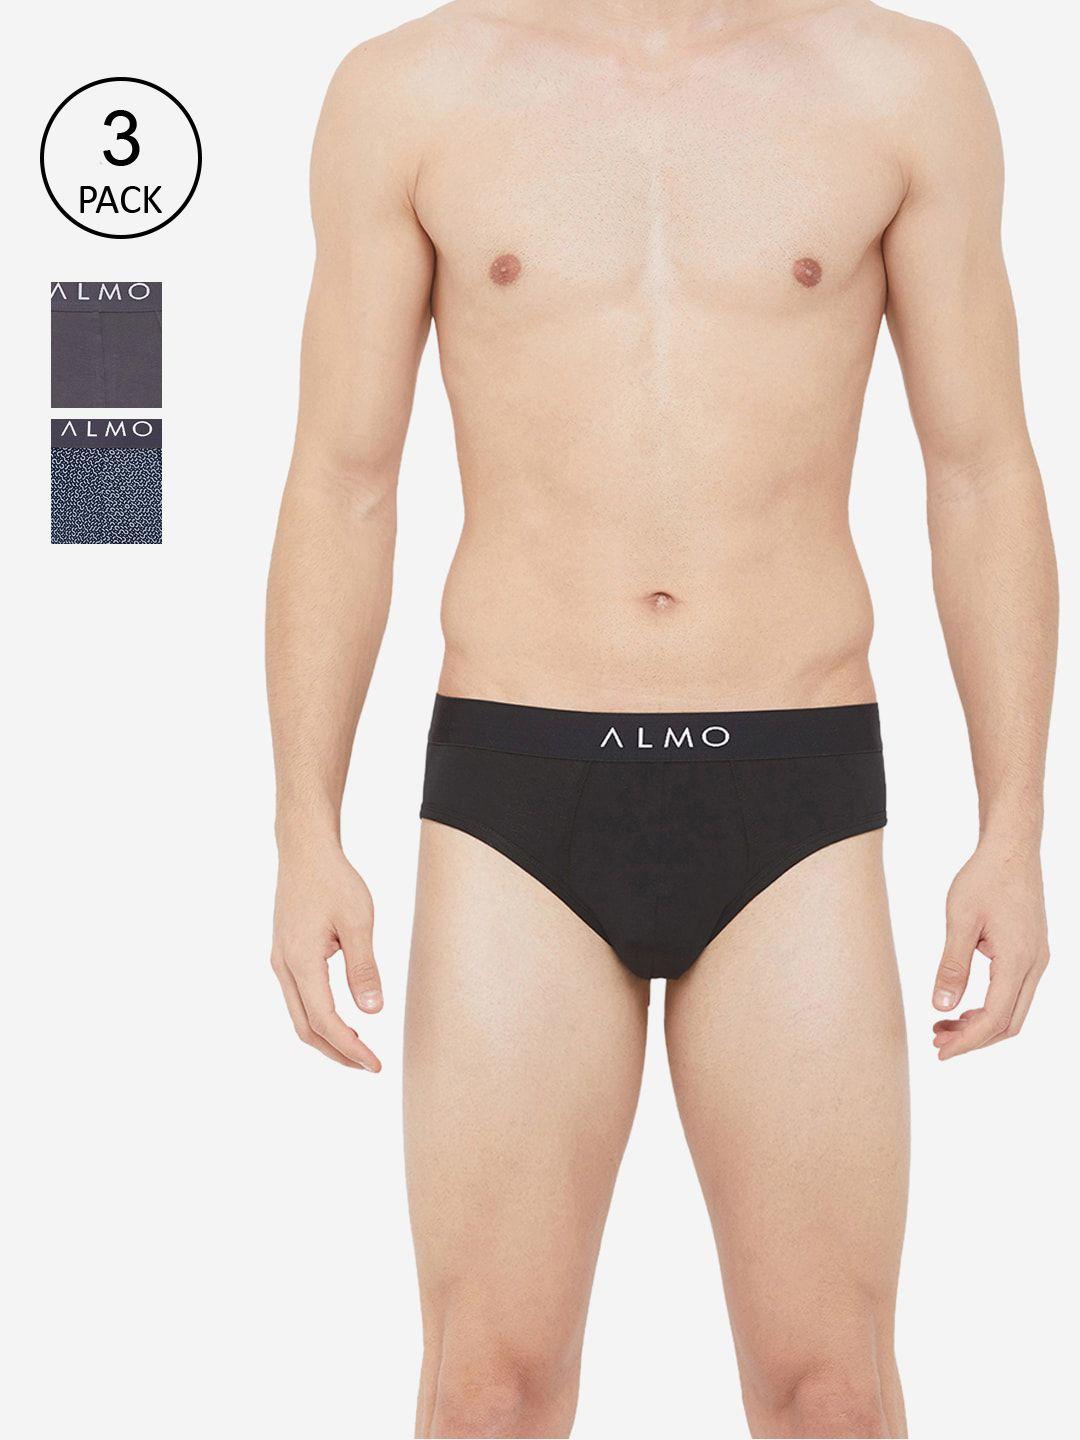 almo wear men pack of 3 organic cotton mixed pattern combo briefs